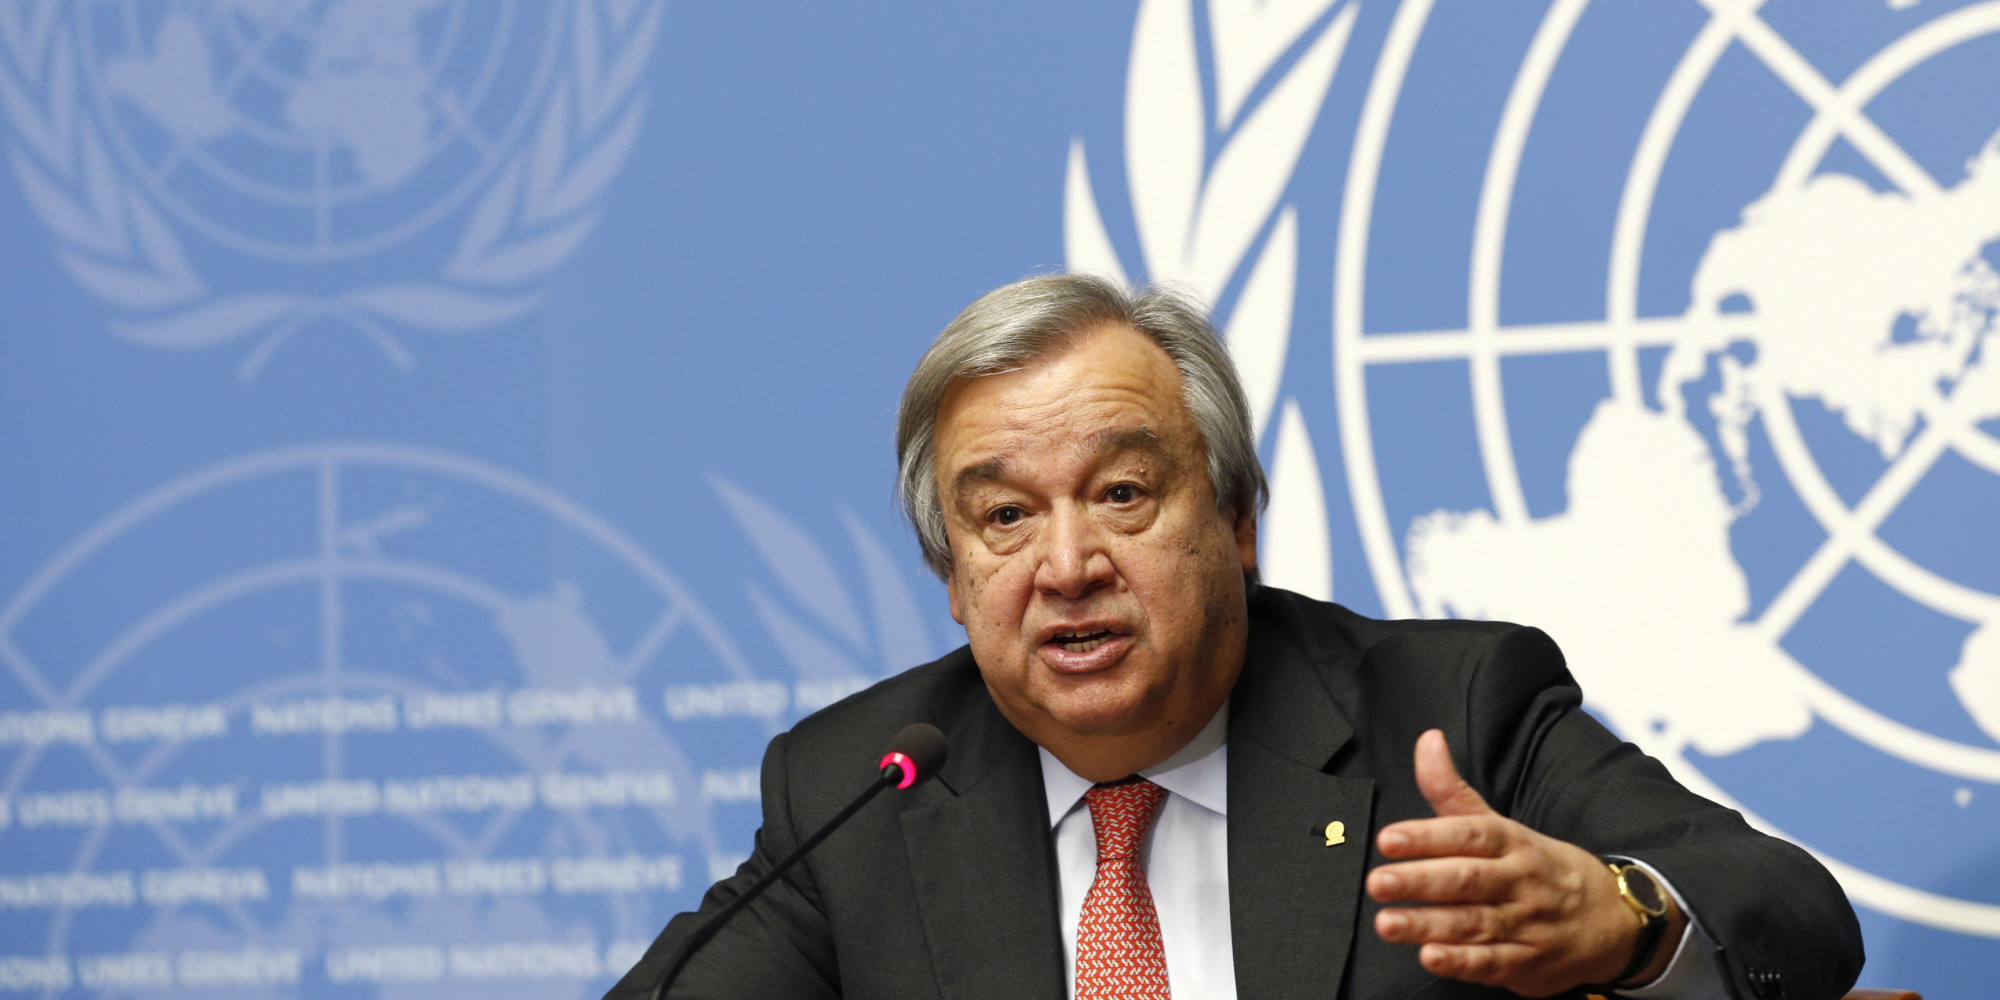 Guterres UN High Commissioner for Refugees addresses a news conference in Geneva